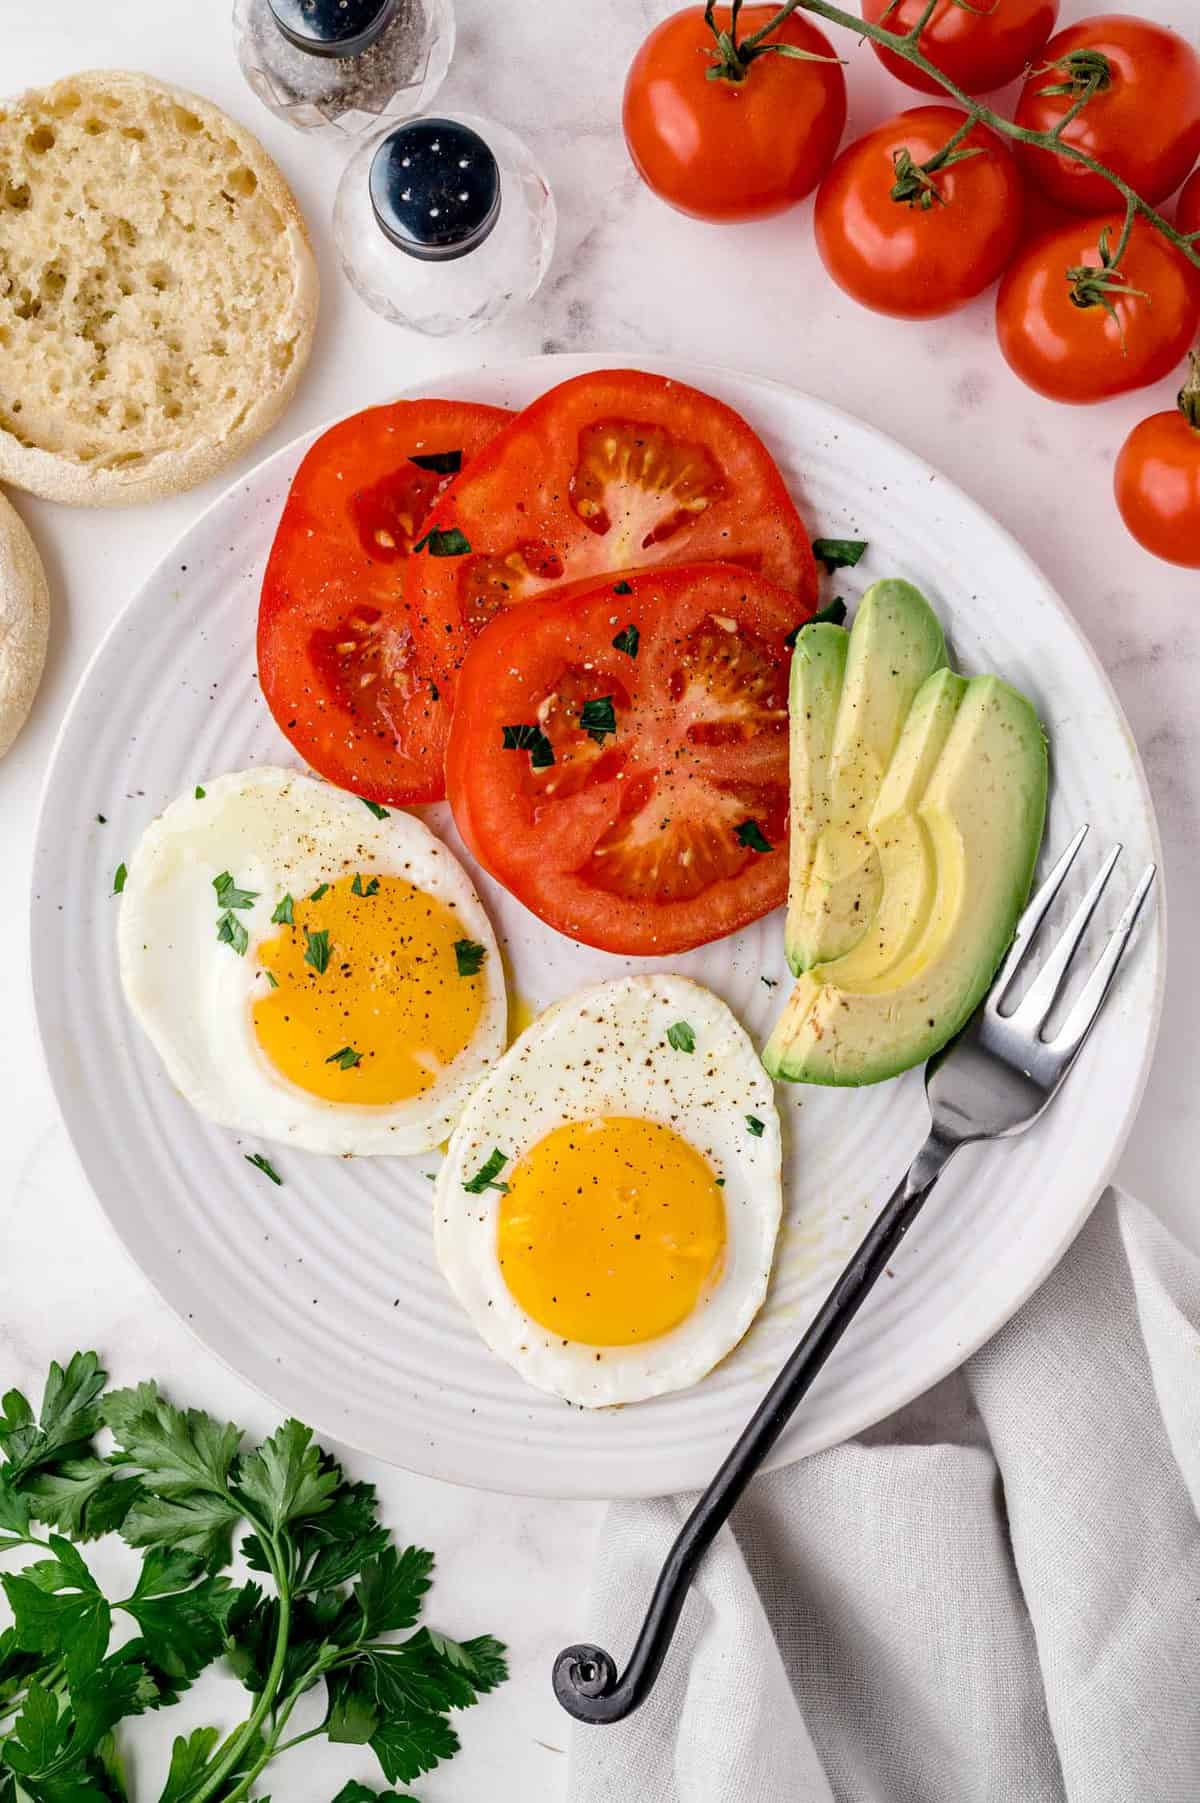 Plate of breakfast food including sunny-side up eggs, tomatoes, avocado.